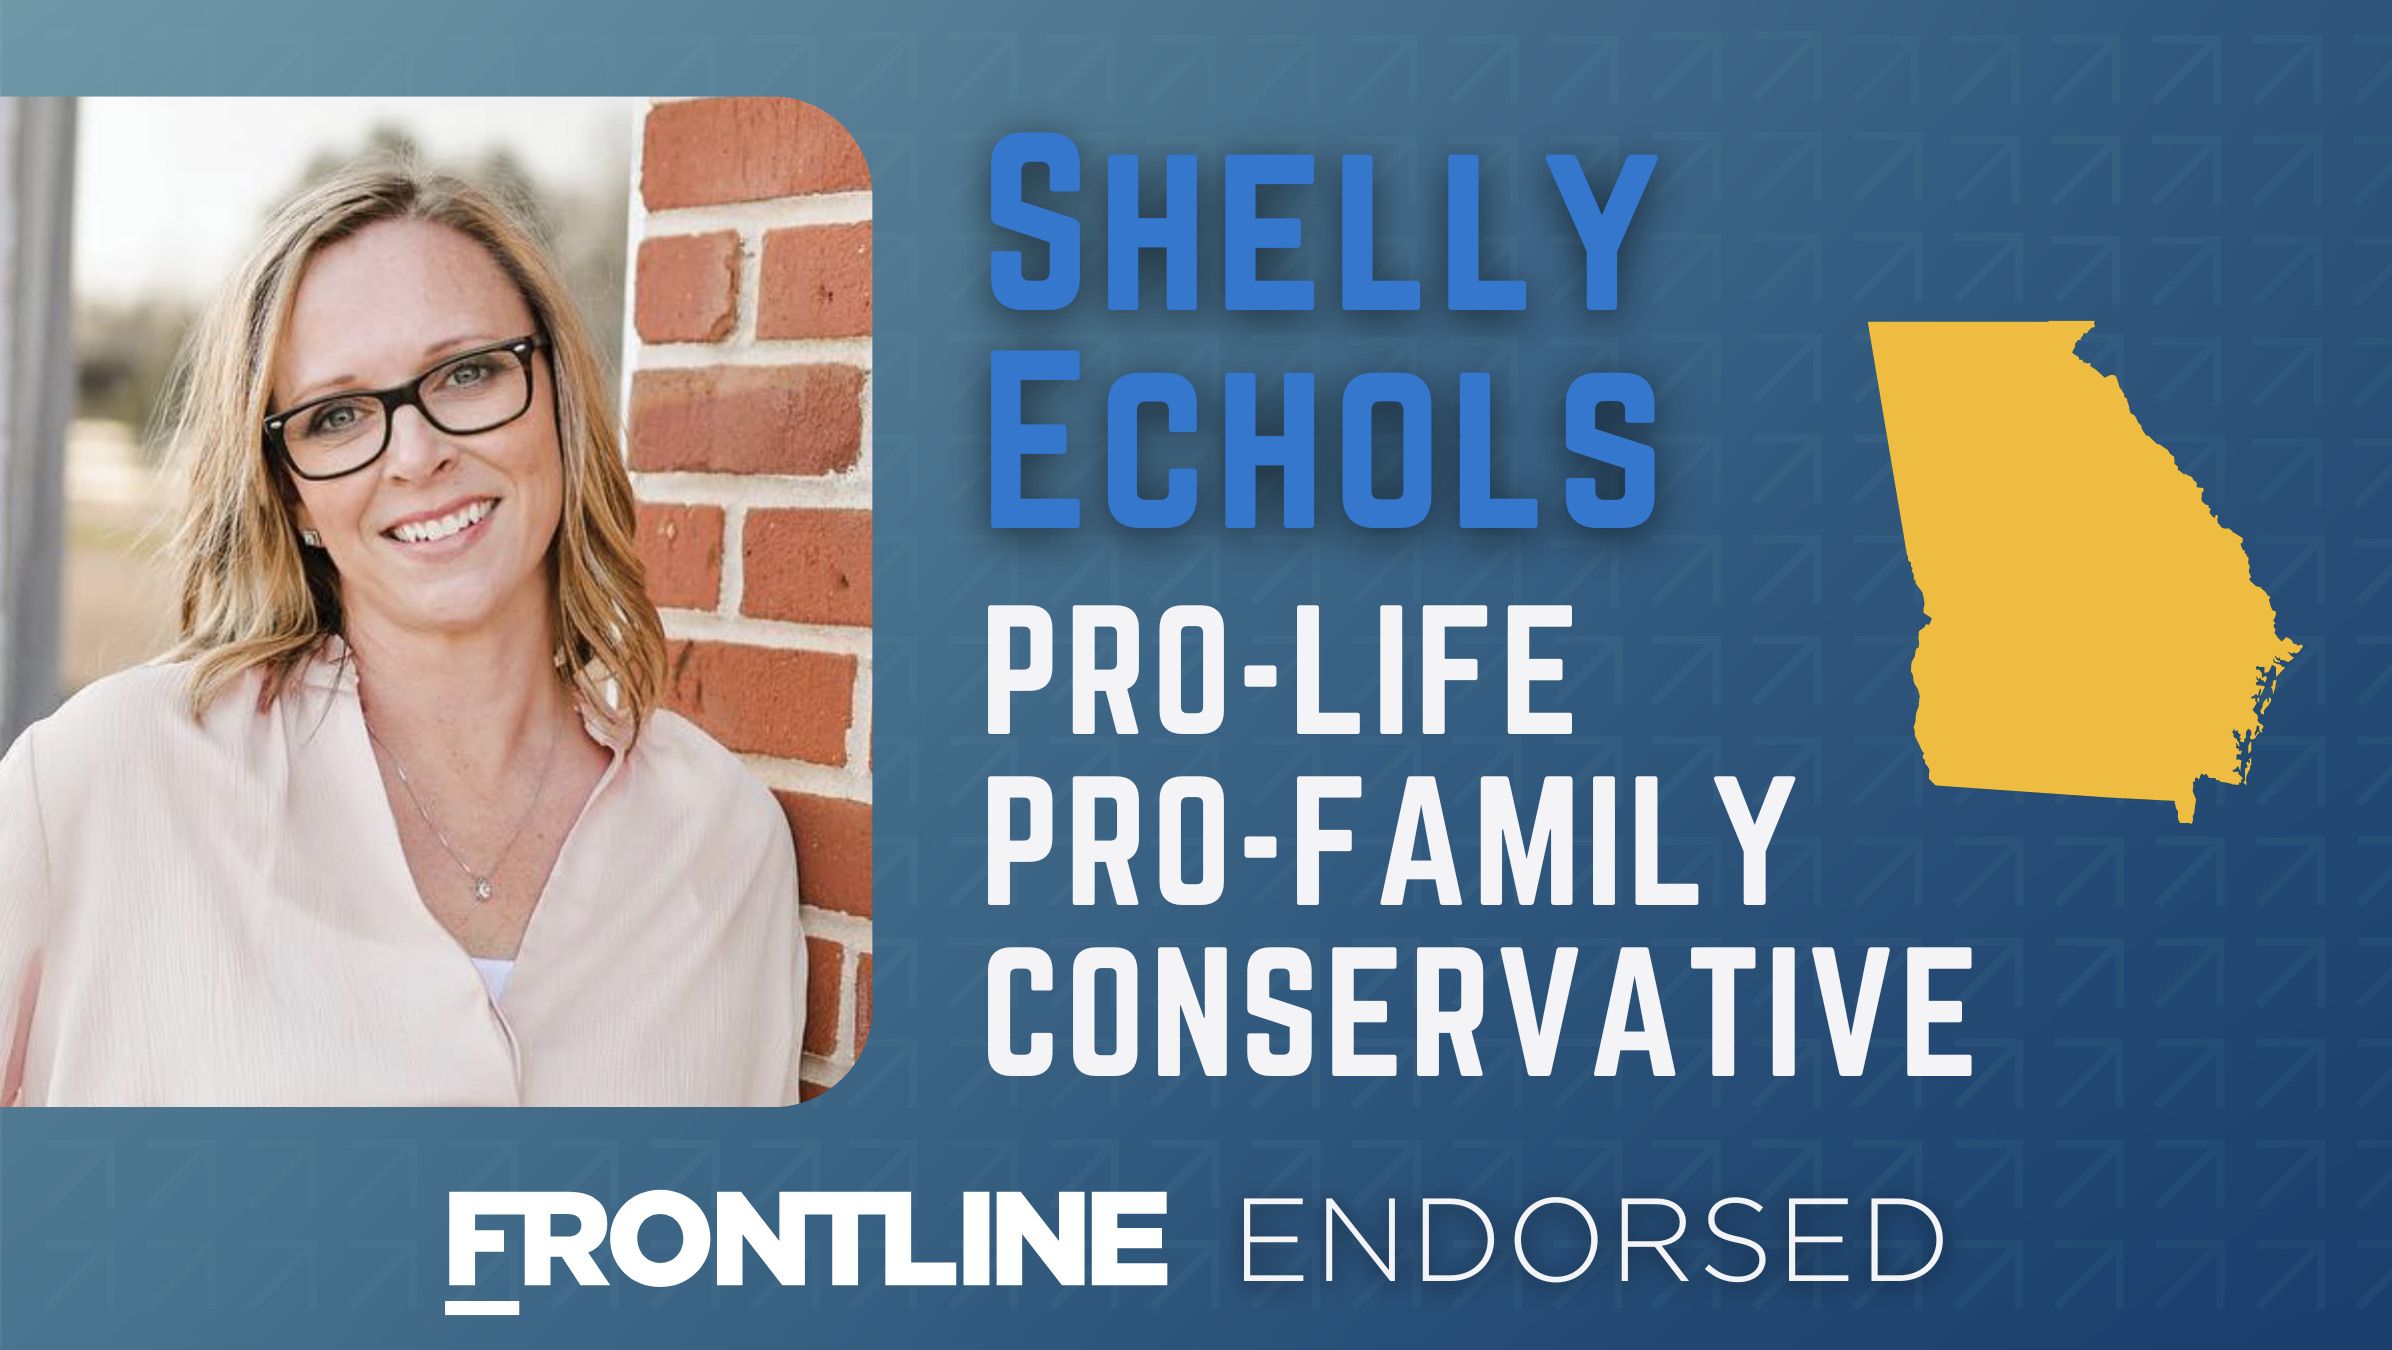 Reminder – Vote for Shelly Echols for State Senate District 49